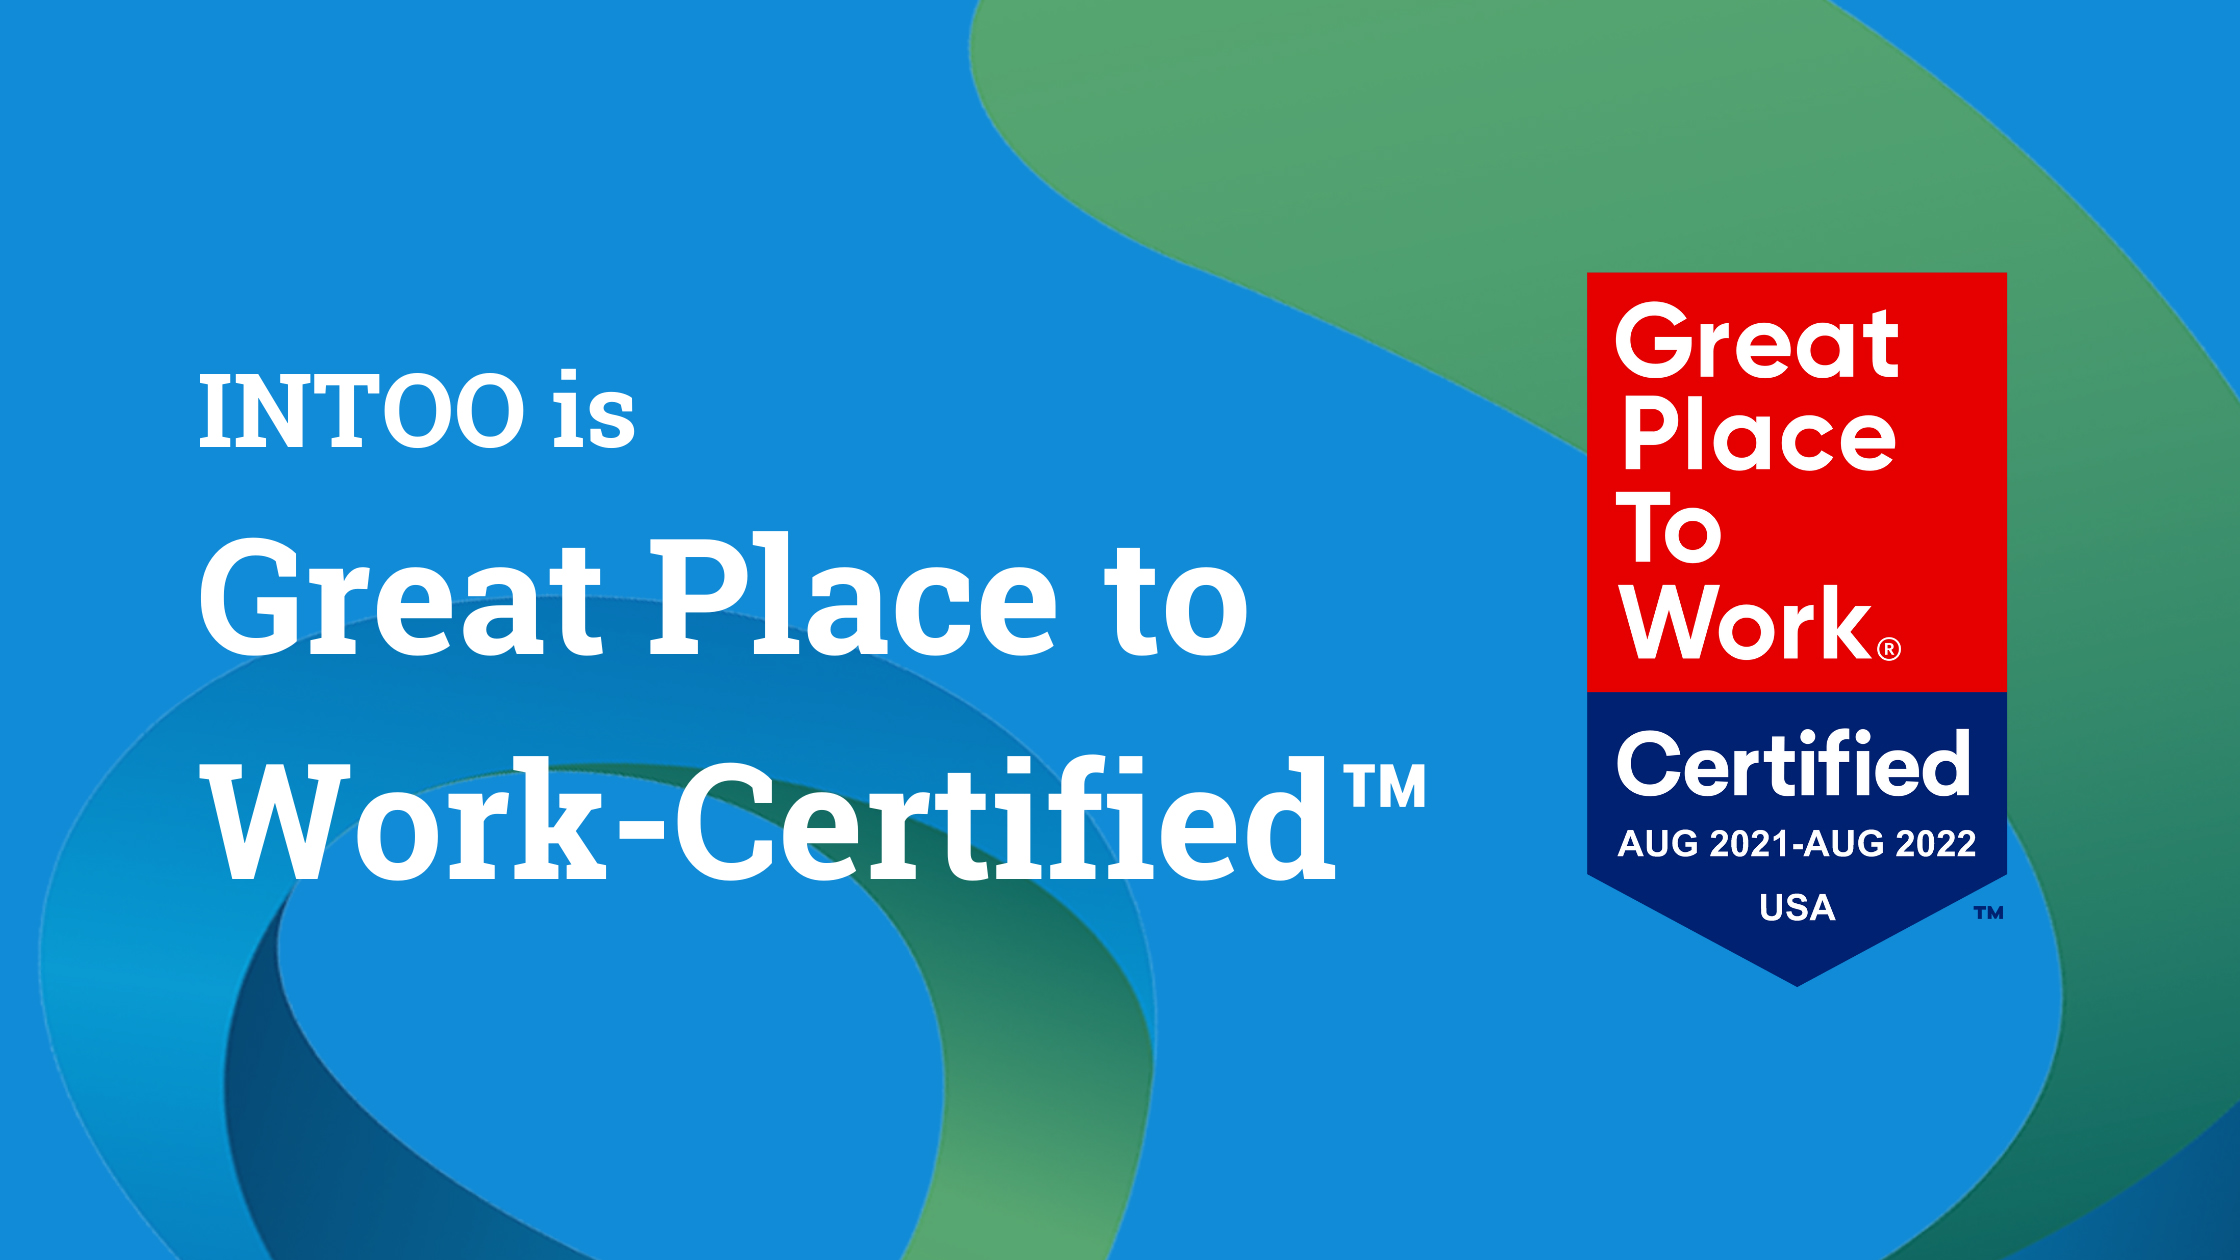 INTOO is Great Place to Work-Certified